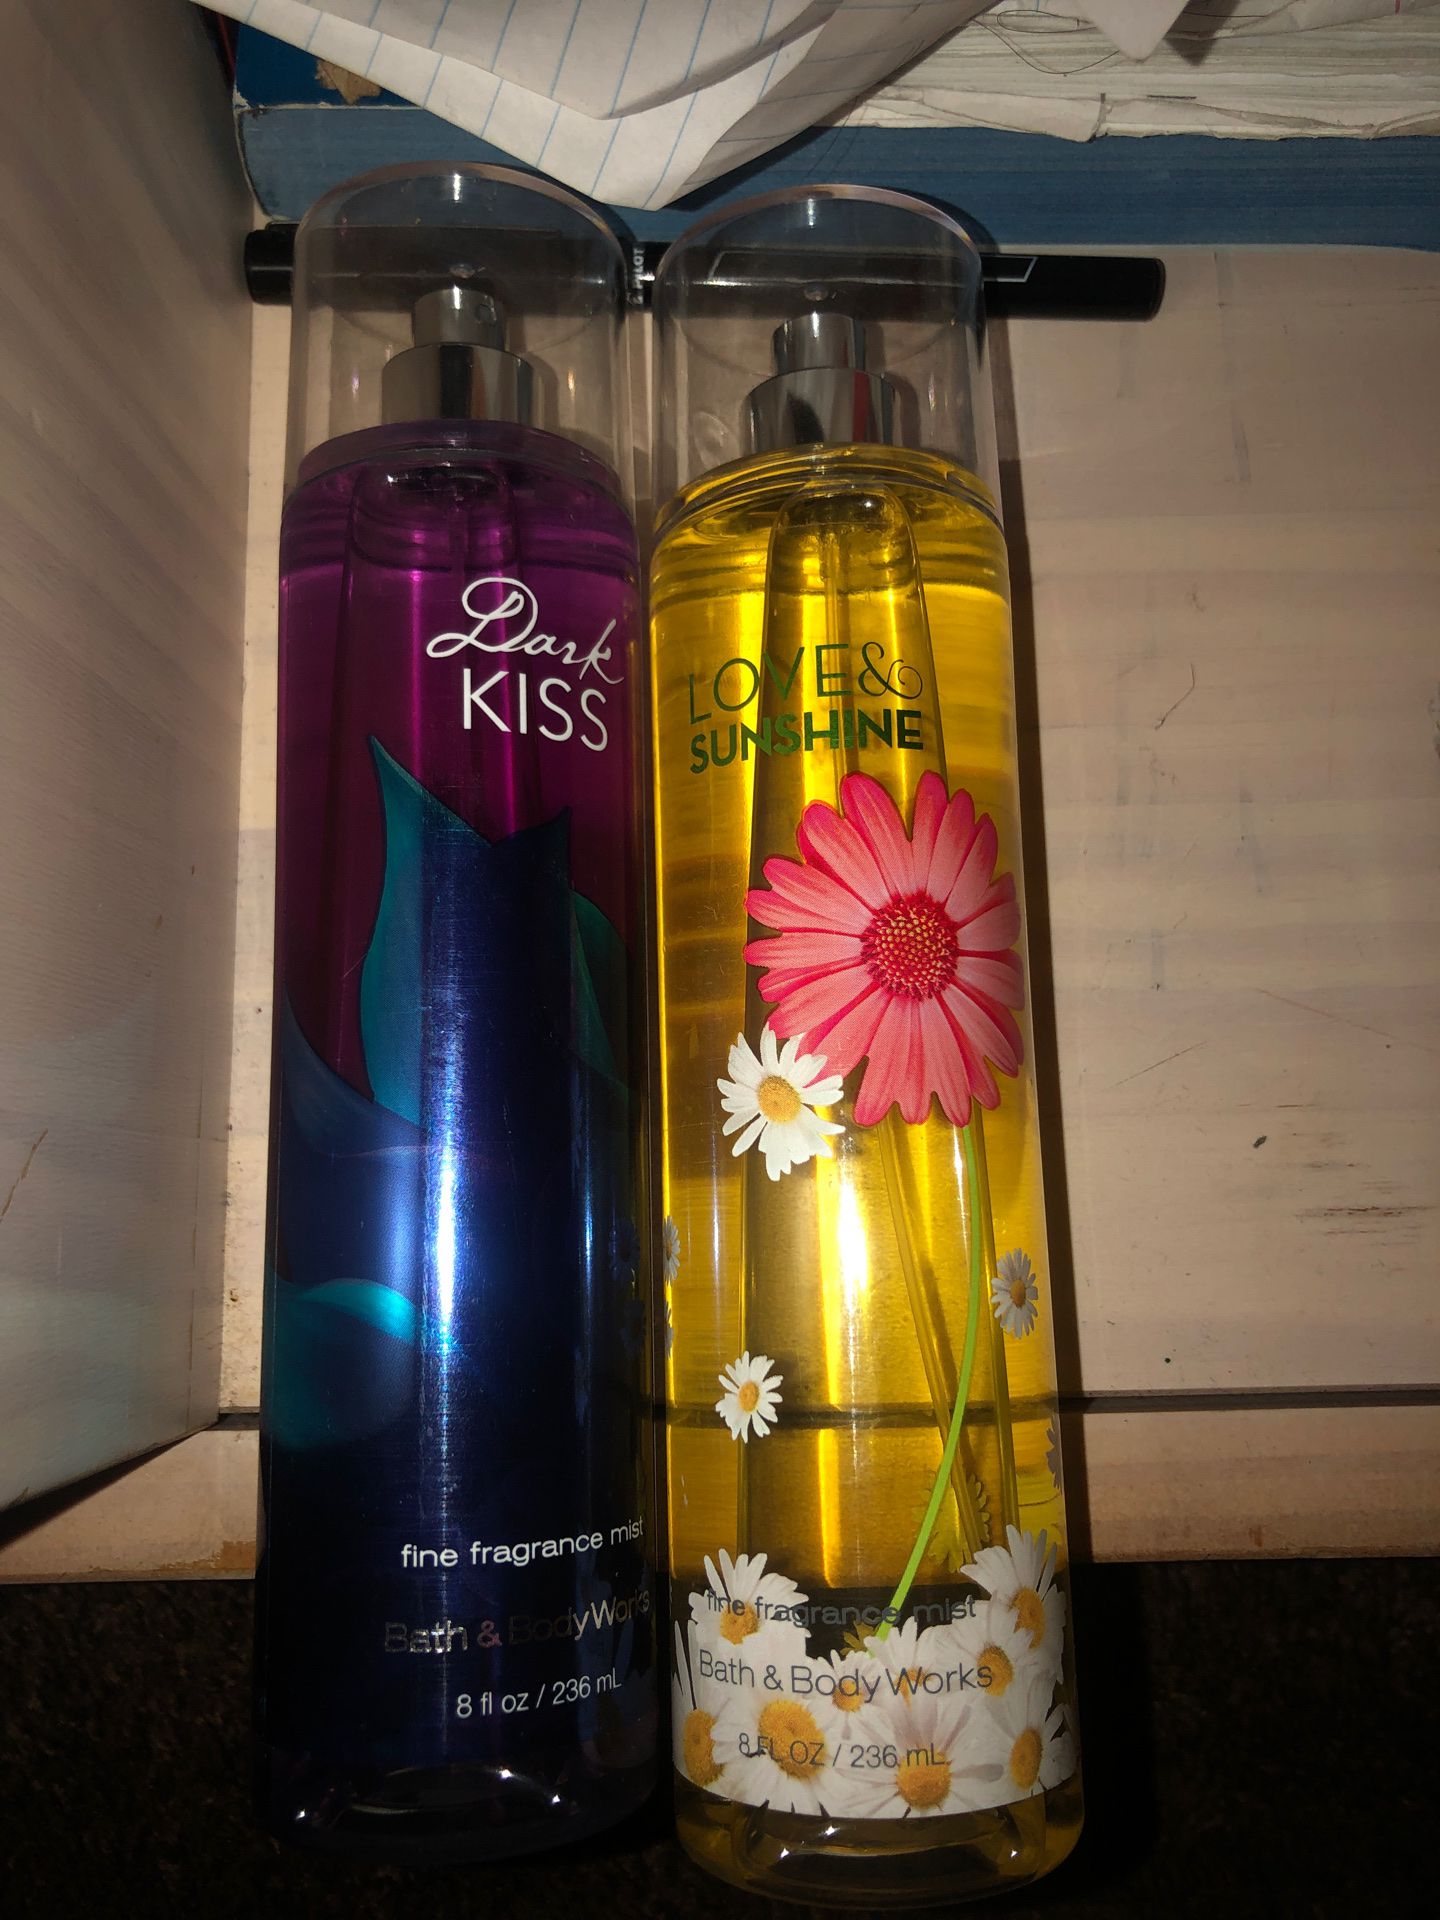 Perfumes from bath and body works